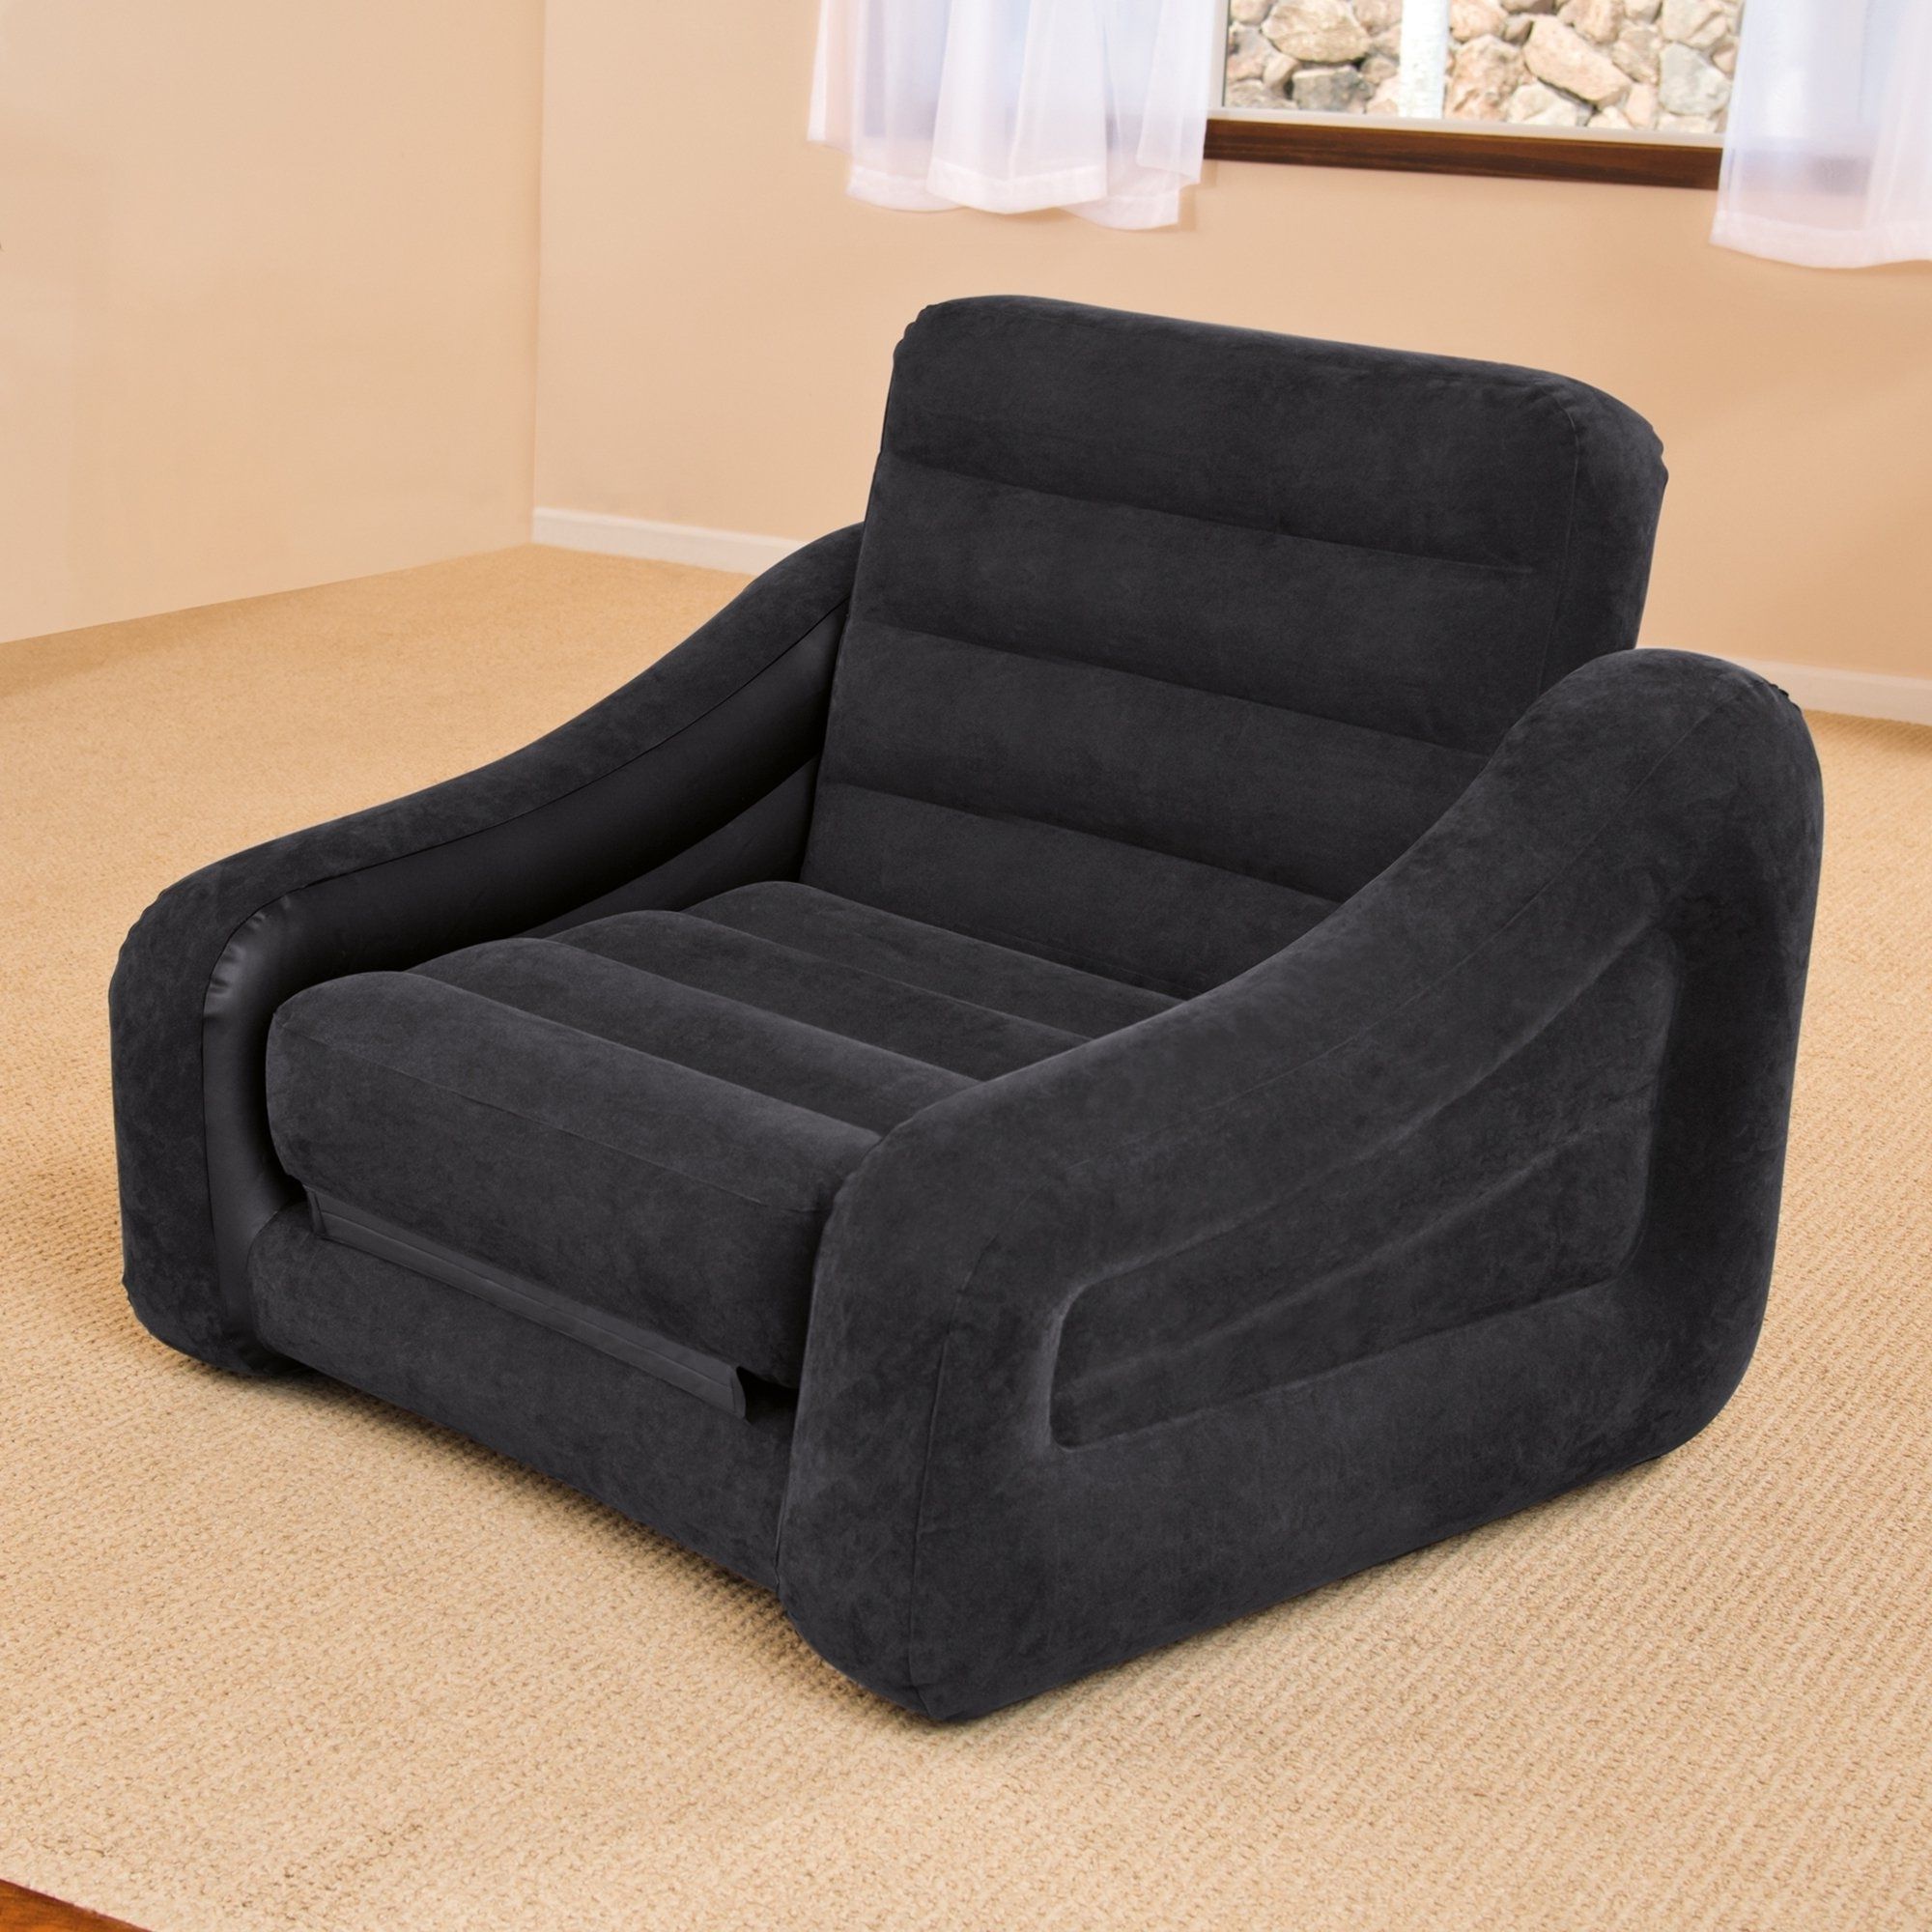 Most Recently Released Pull Out Sofa Bed Queen Size Sofa Hpricot Within Pull Out Sofa Bed With Queen Size Sofas (View 5 of 15)